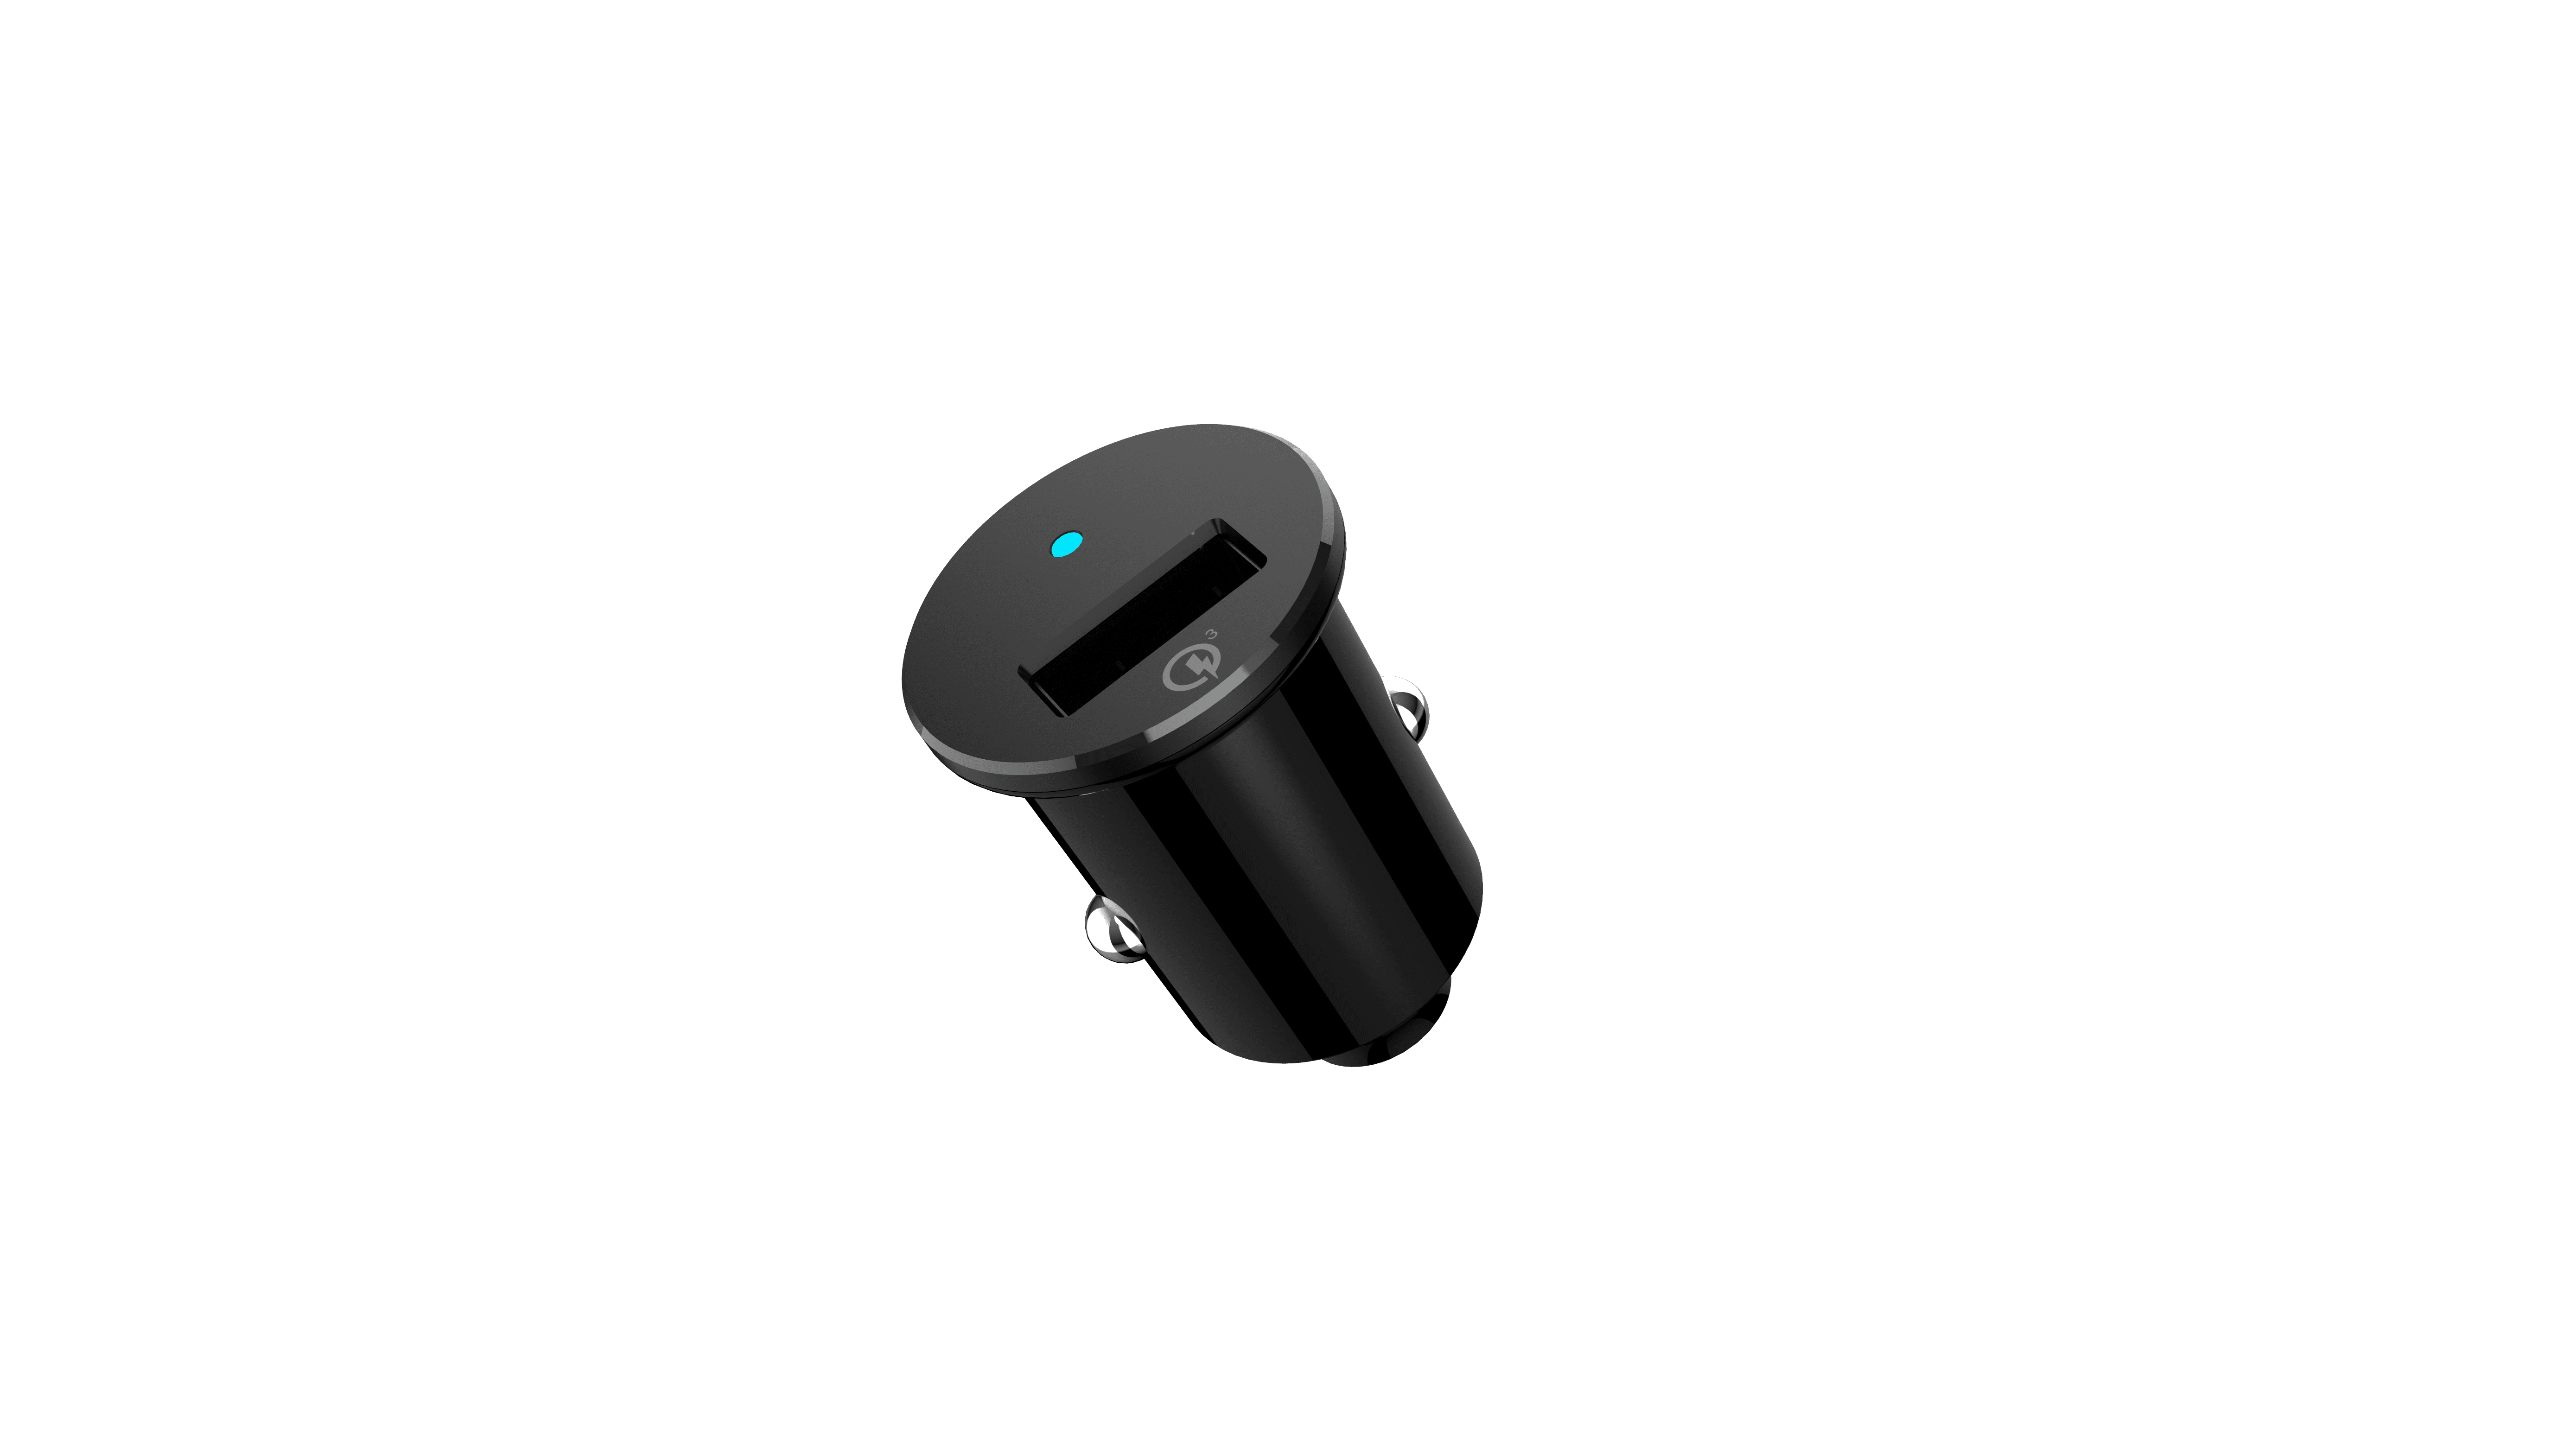 Auto Drive Quick Charge 3.0 USB Car Charger for Smartphones, Tablets and More